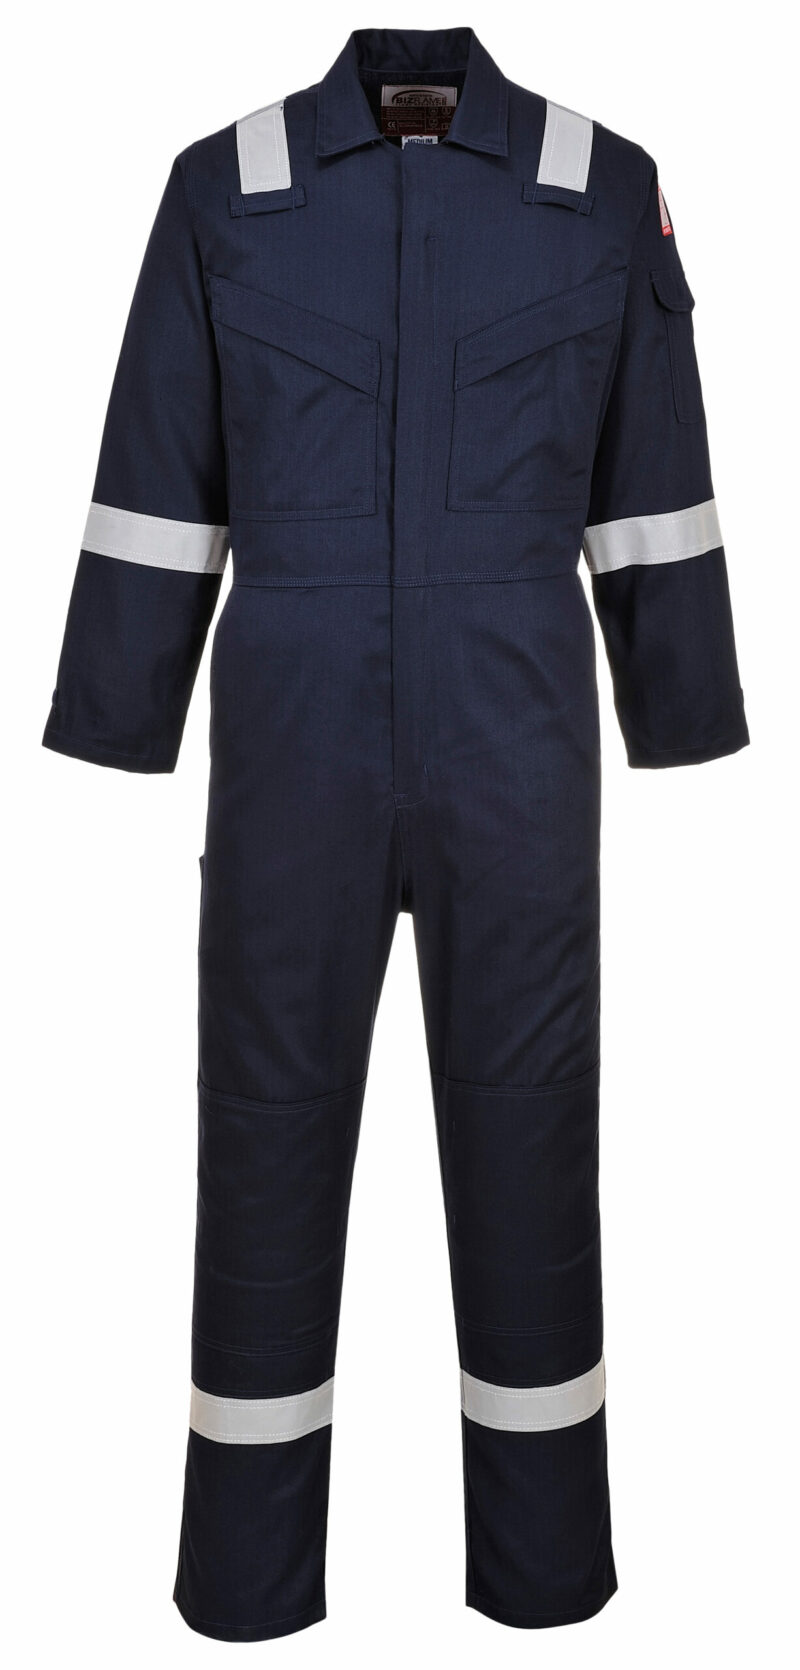 Portwest FR21 Super Light Weight Anti-Static Flame Retardant Coverall-17118